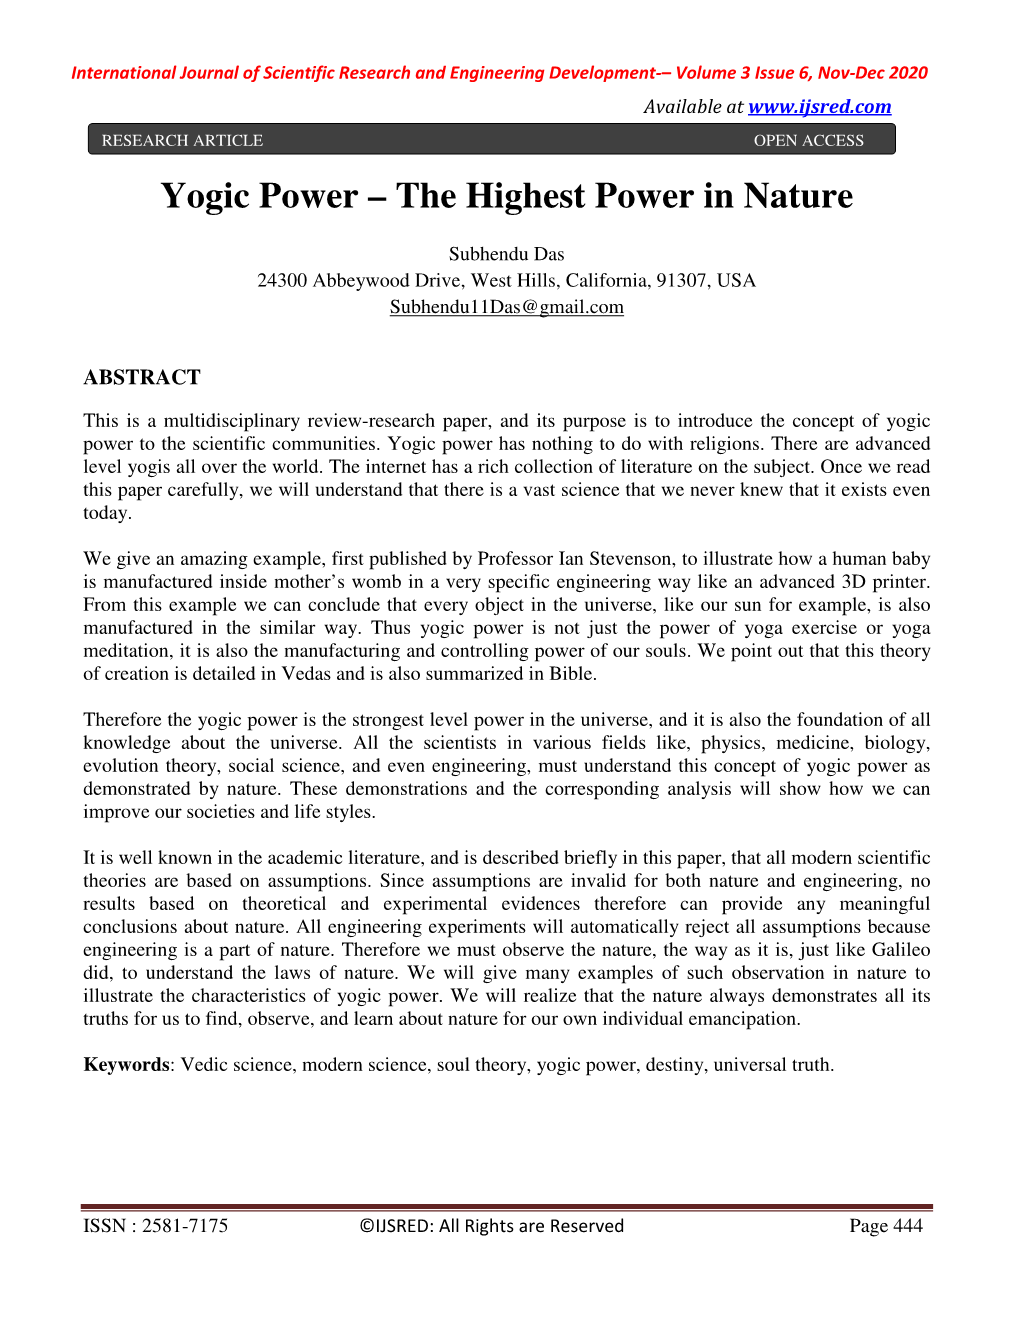 Yogic Power – the Highest Power in Nature